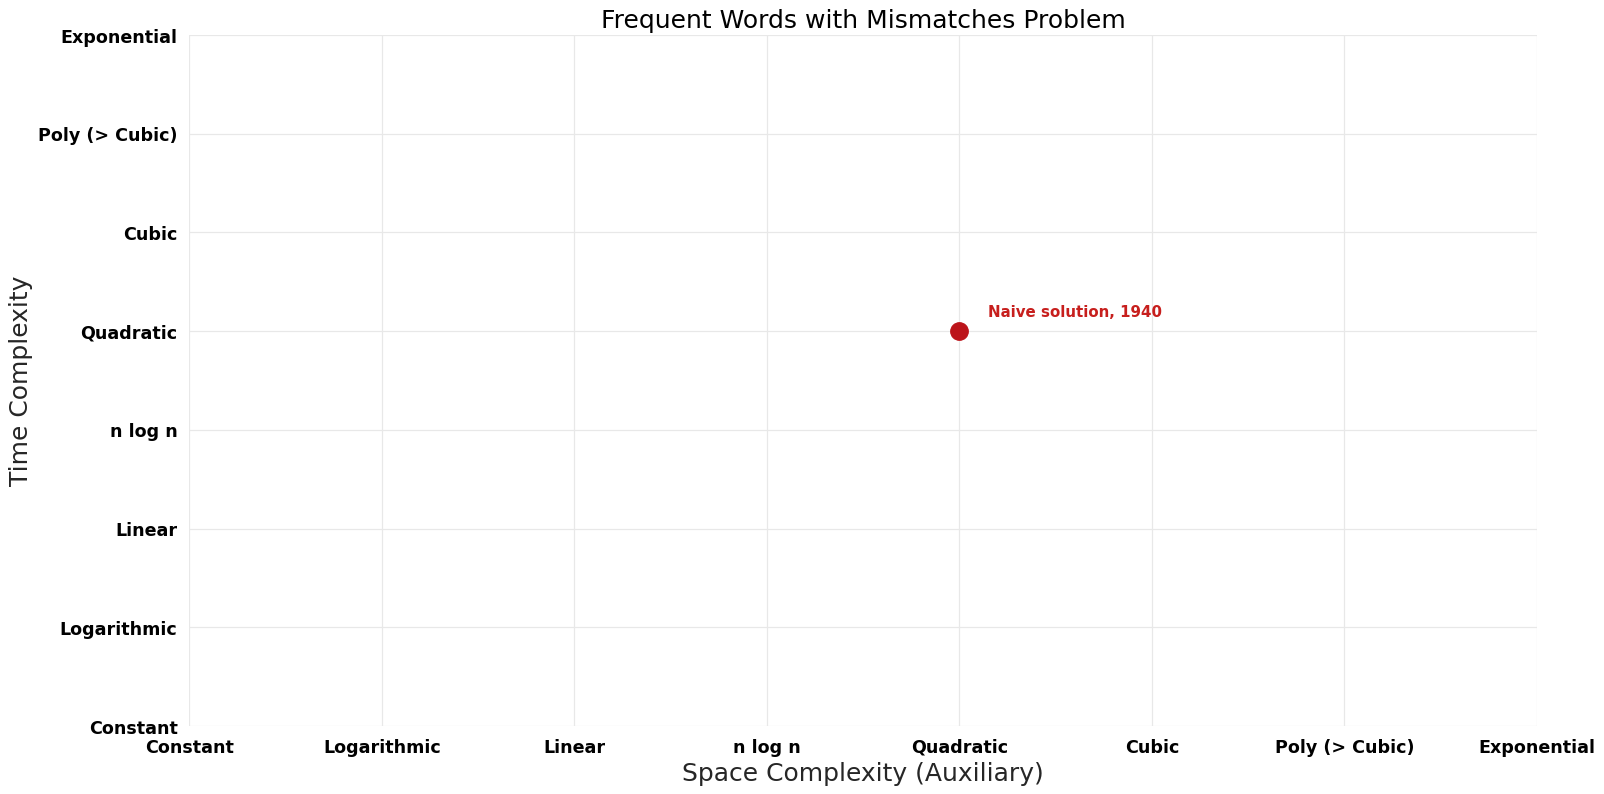 File:Frequent Words with Mismatches Problem - Pareto Frontier.png